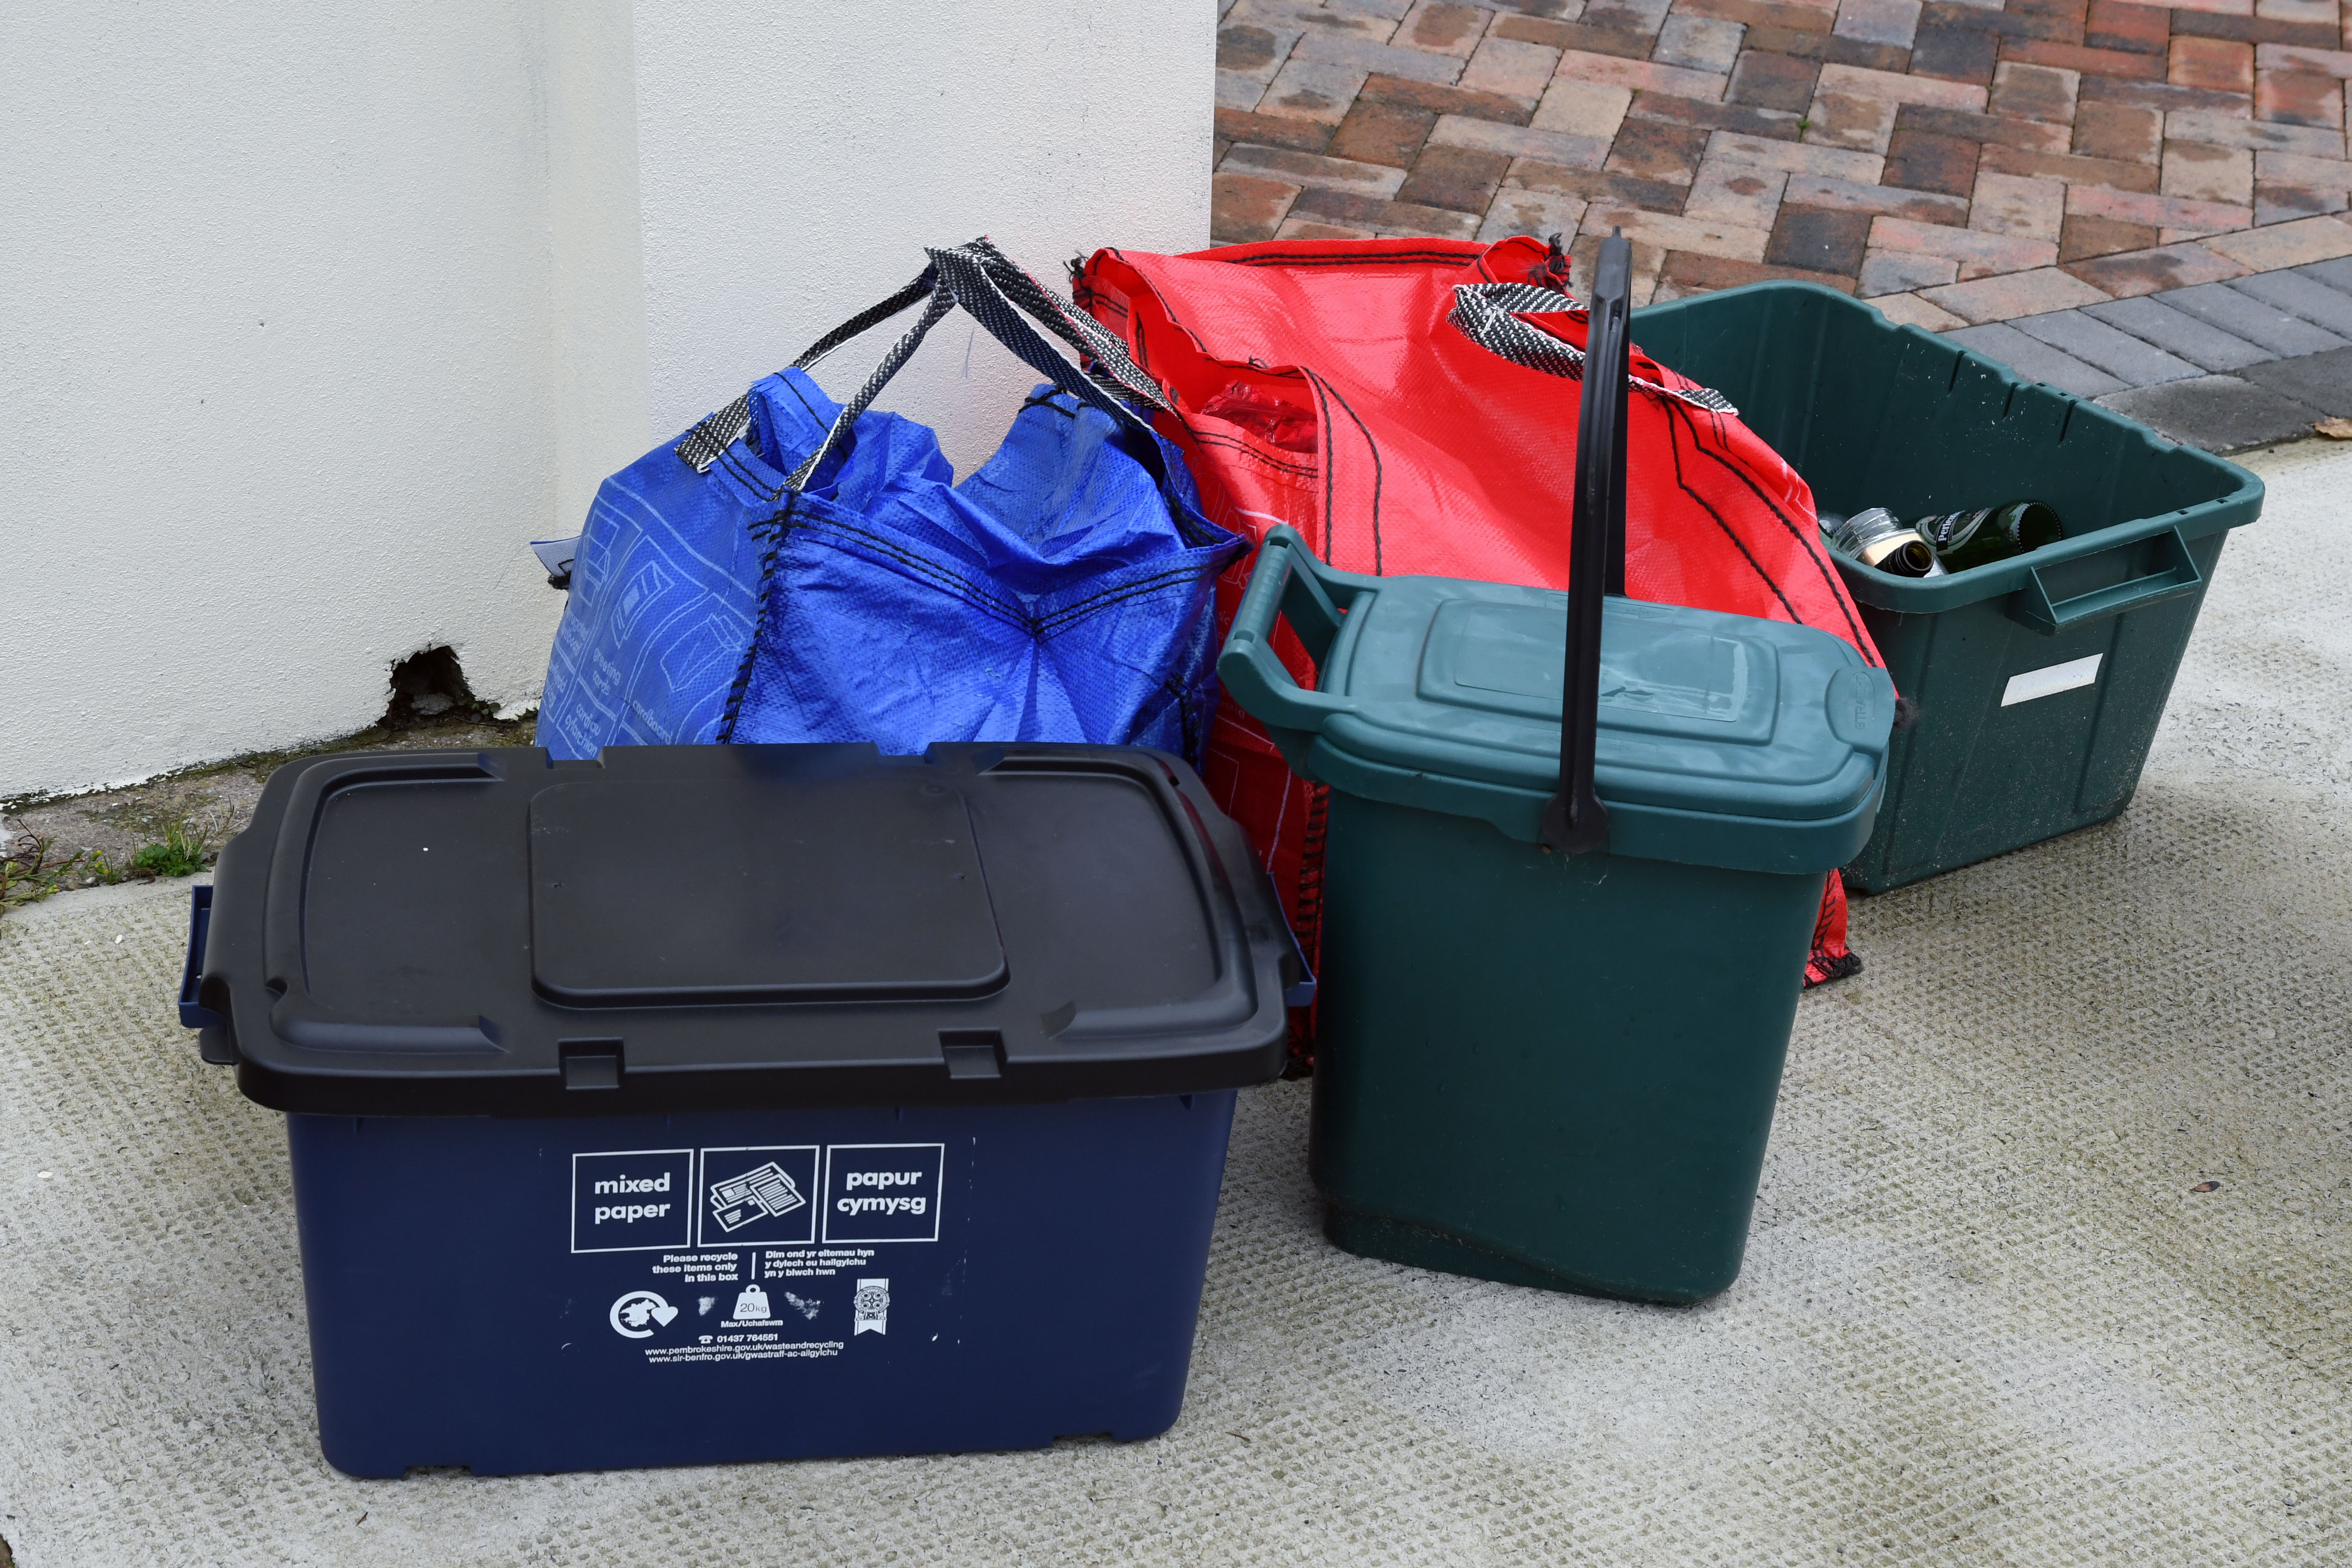 Waste and recycling centres close but kerbside collections continue - Pembrokeshire County Council